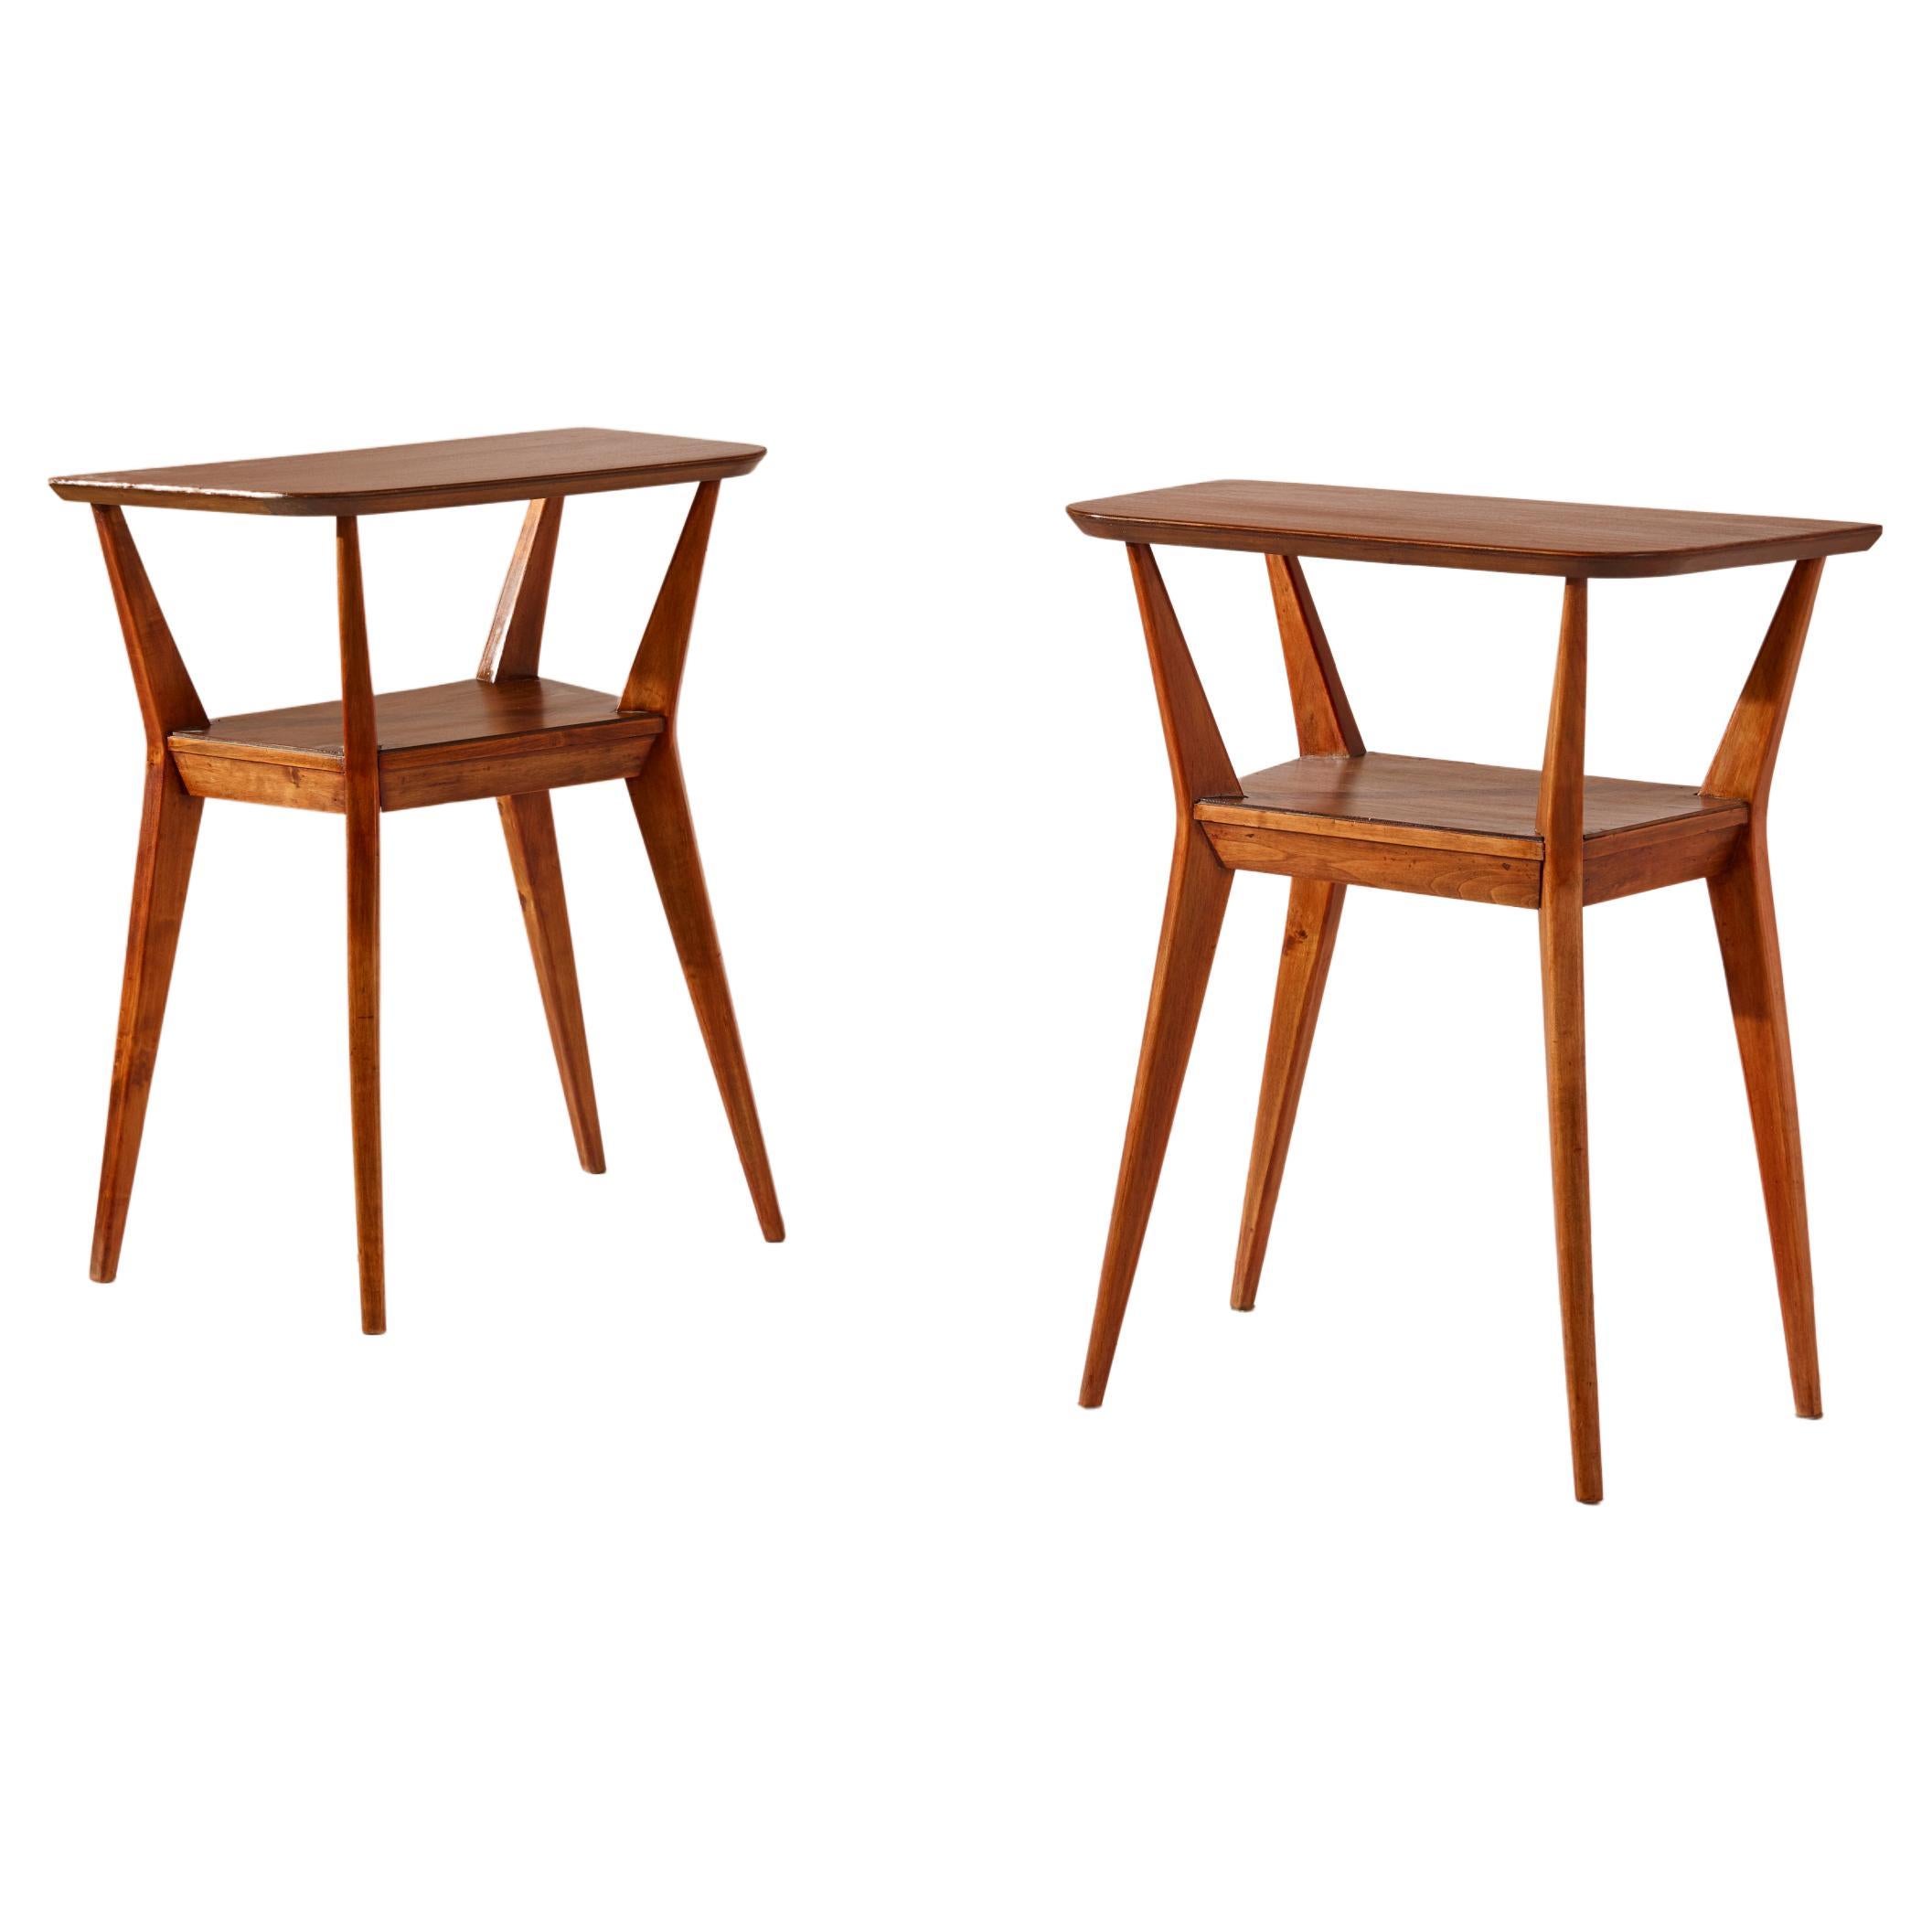 Two Beechwood Side Tables in the Manner of Gio Ponti, Italy, 1950s